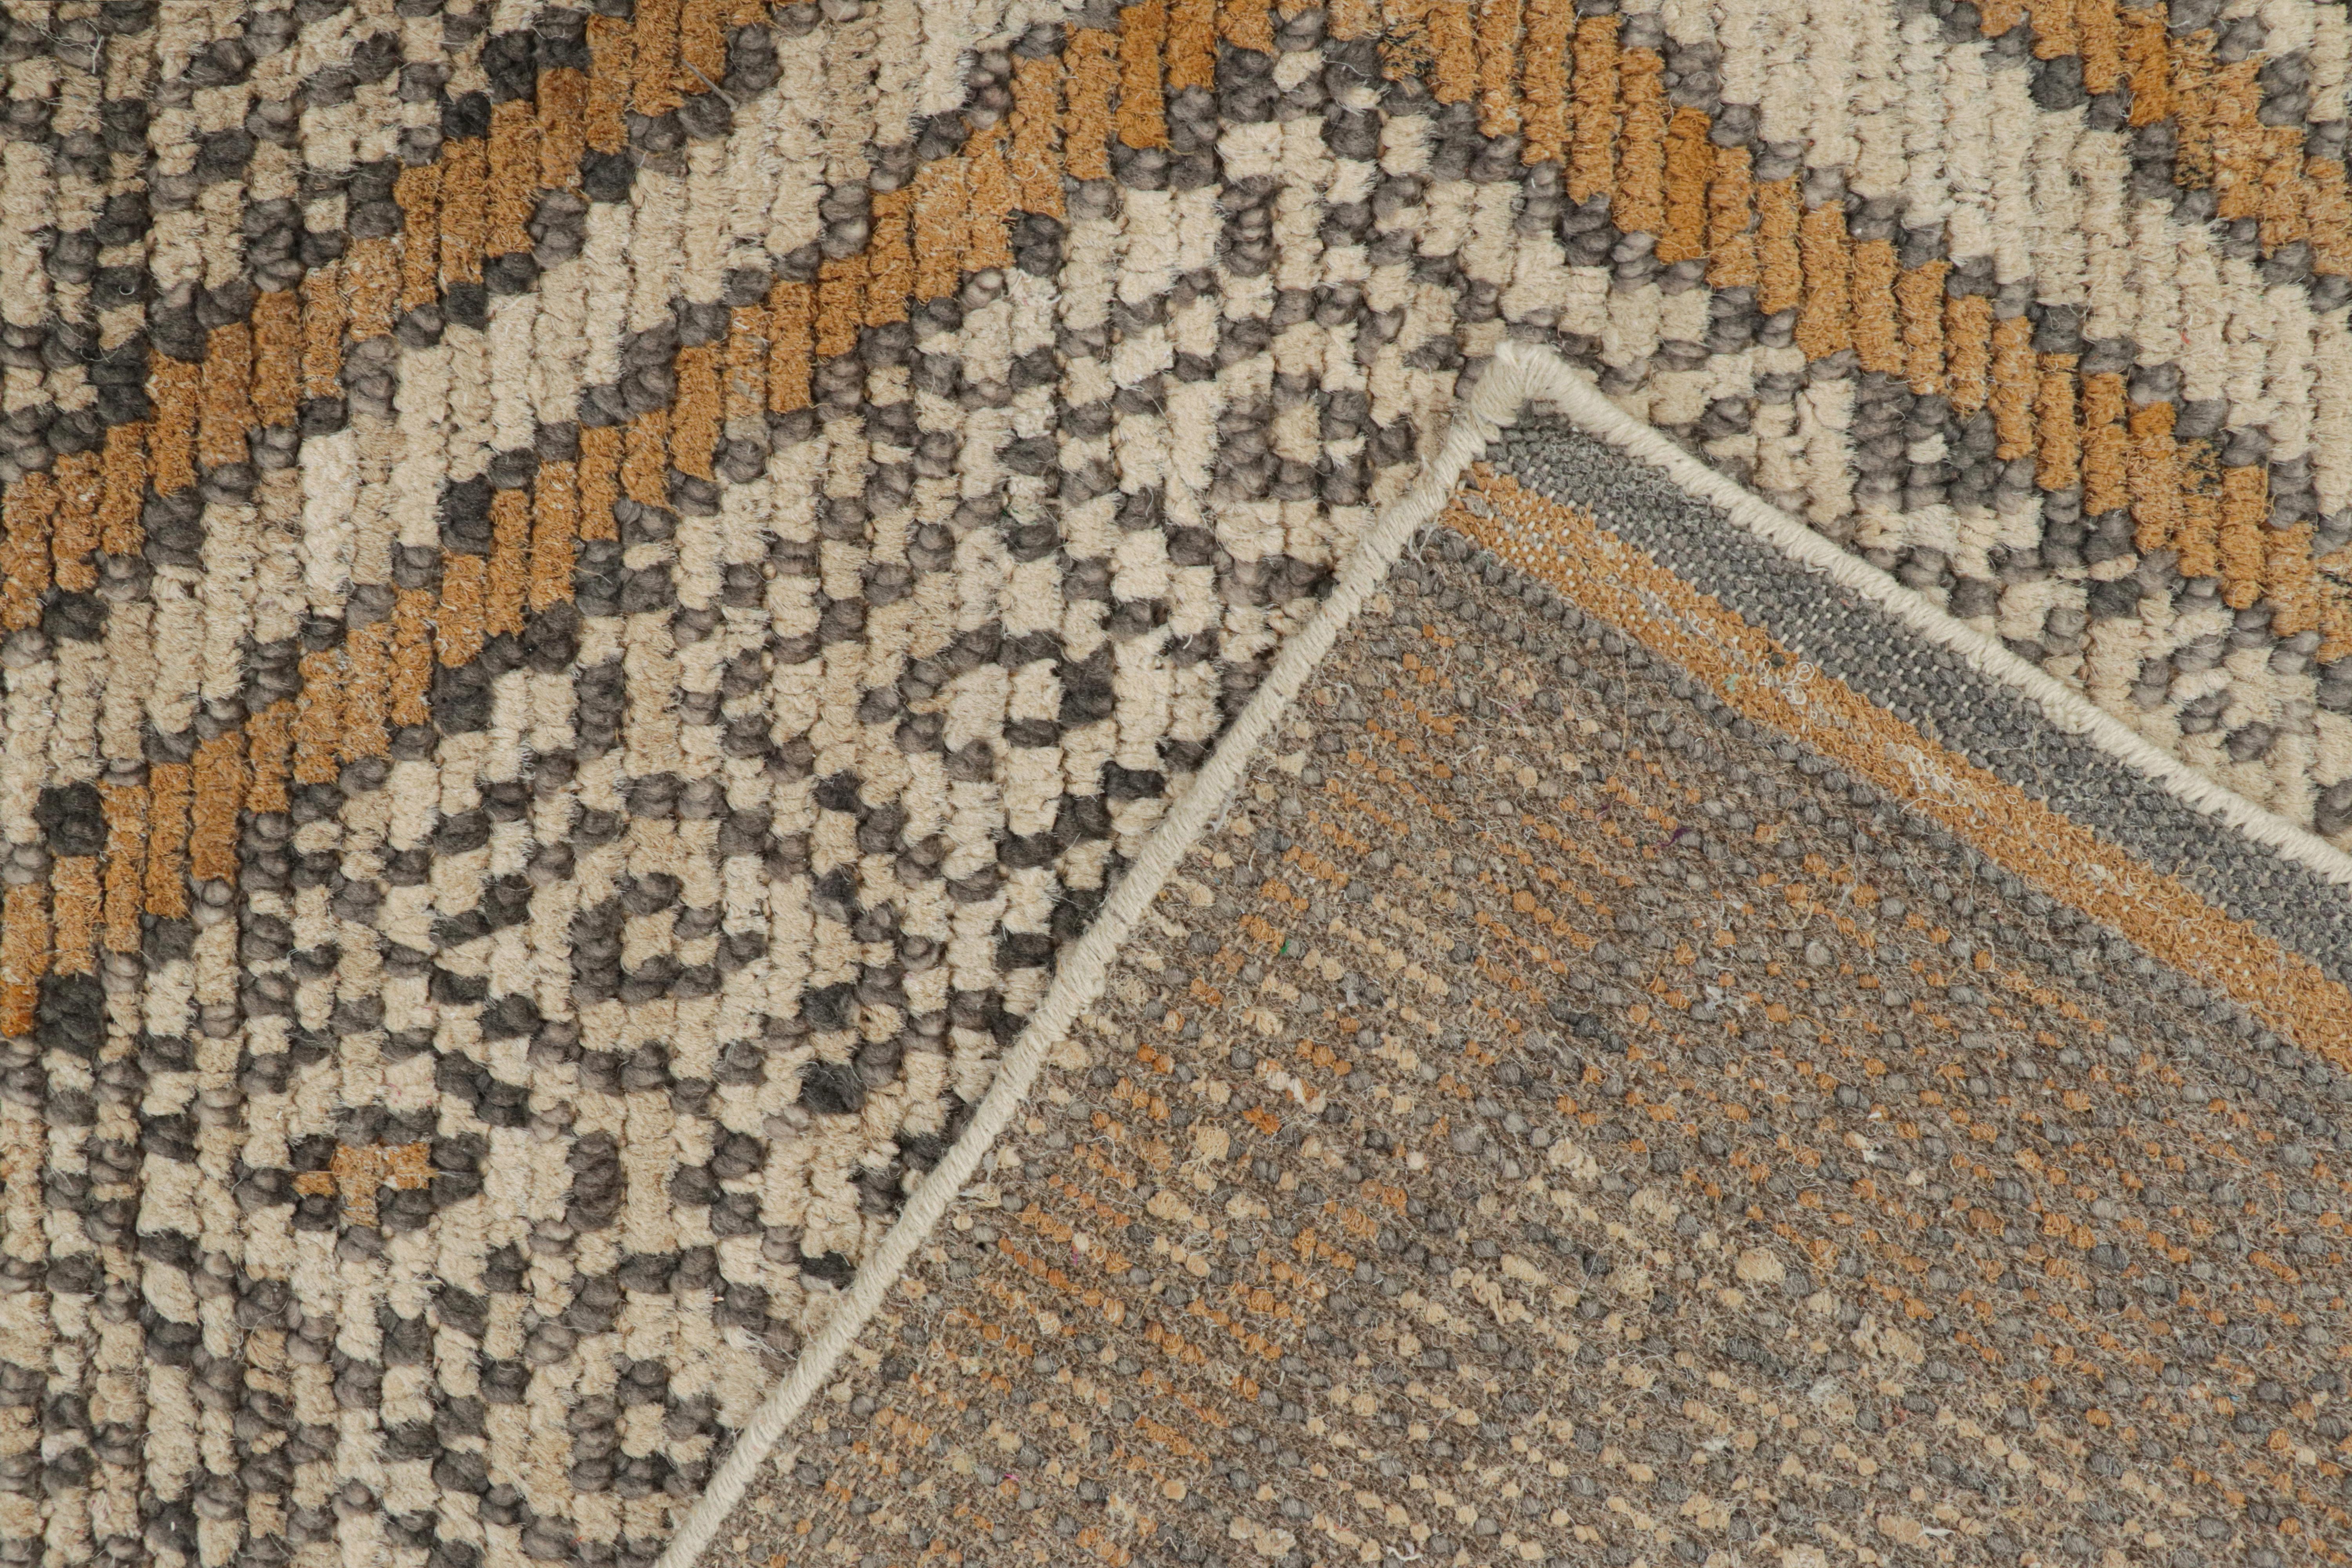 Contemporary Rug & Kilim’s Moroccan Style Rug in Auburn Orange and White Diamond Patterns For Sale